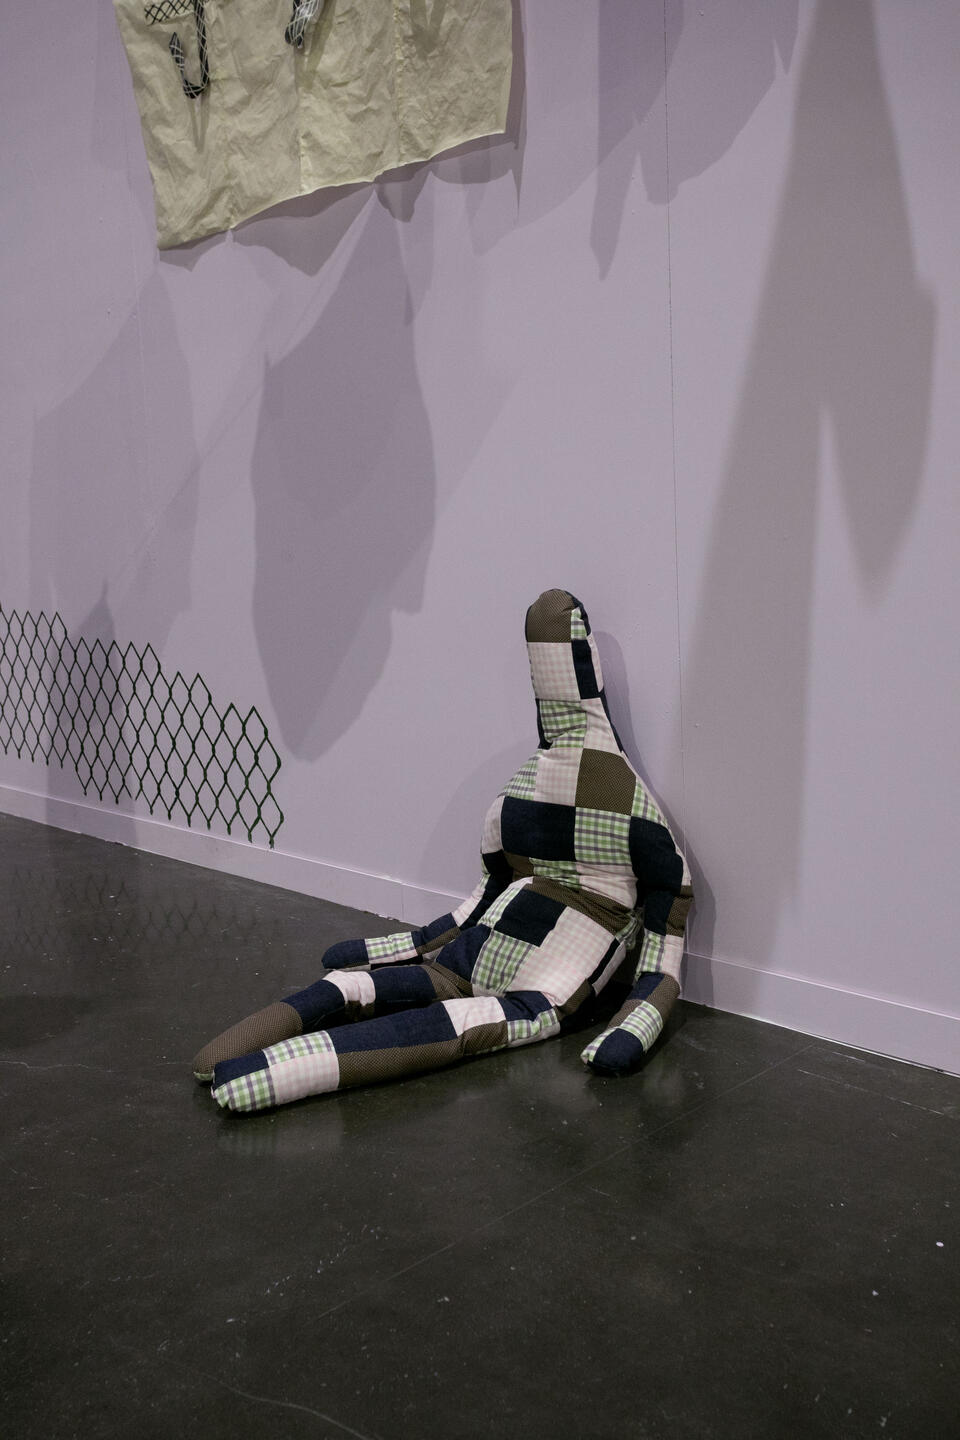 image of quilted stuffed human-like doll, sitting on the floor hunched over